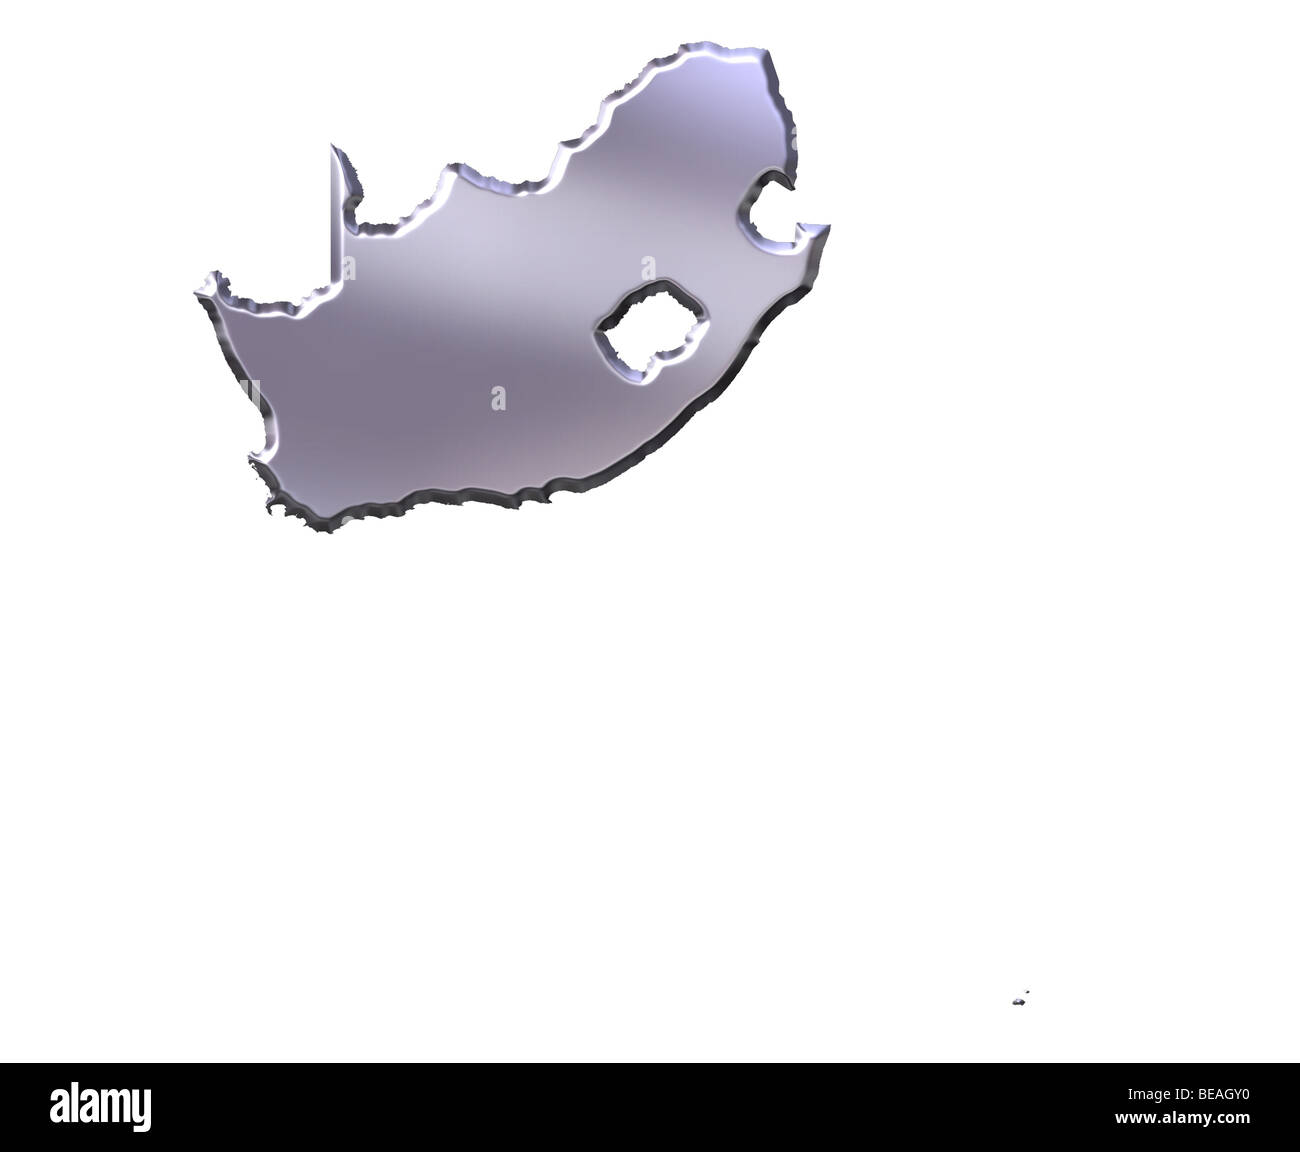 South Africa 3d silver map Stock Photo